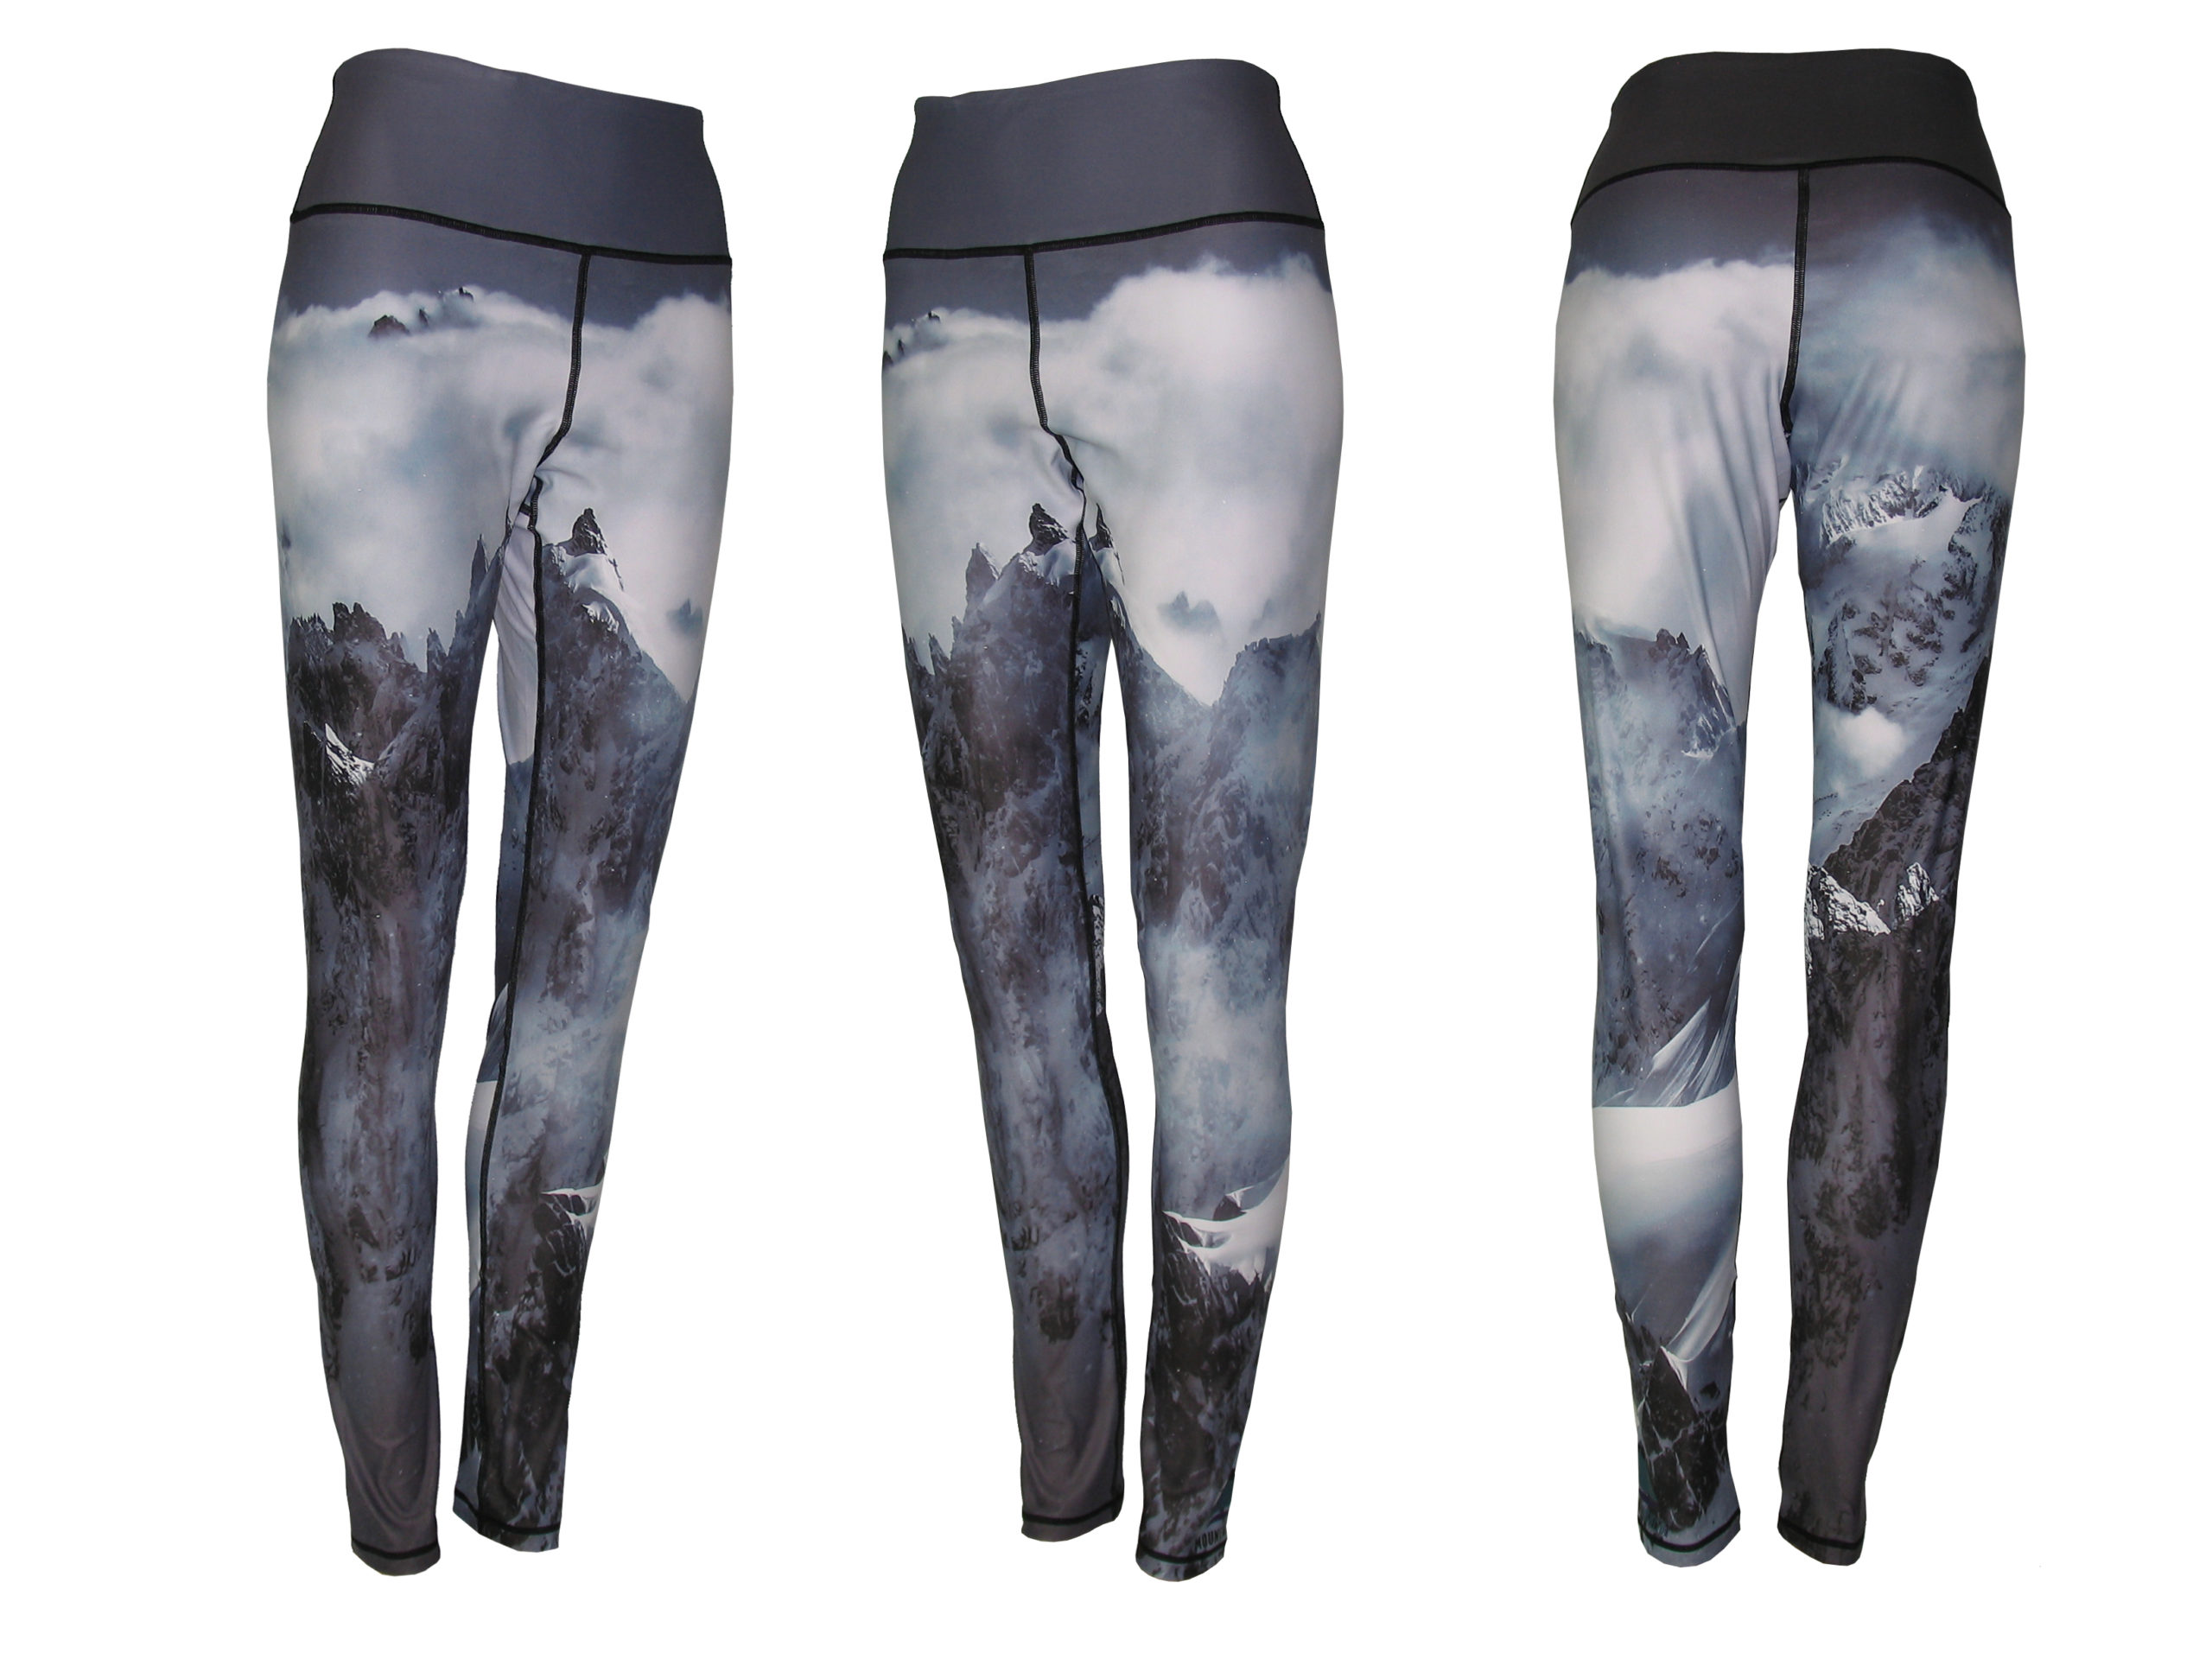 https://trailofhighways.com/wp-content/uploads/2018/09/Jagged-Edge-Leggings-Combined-copy-scaled.jpg